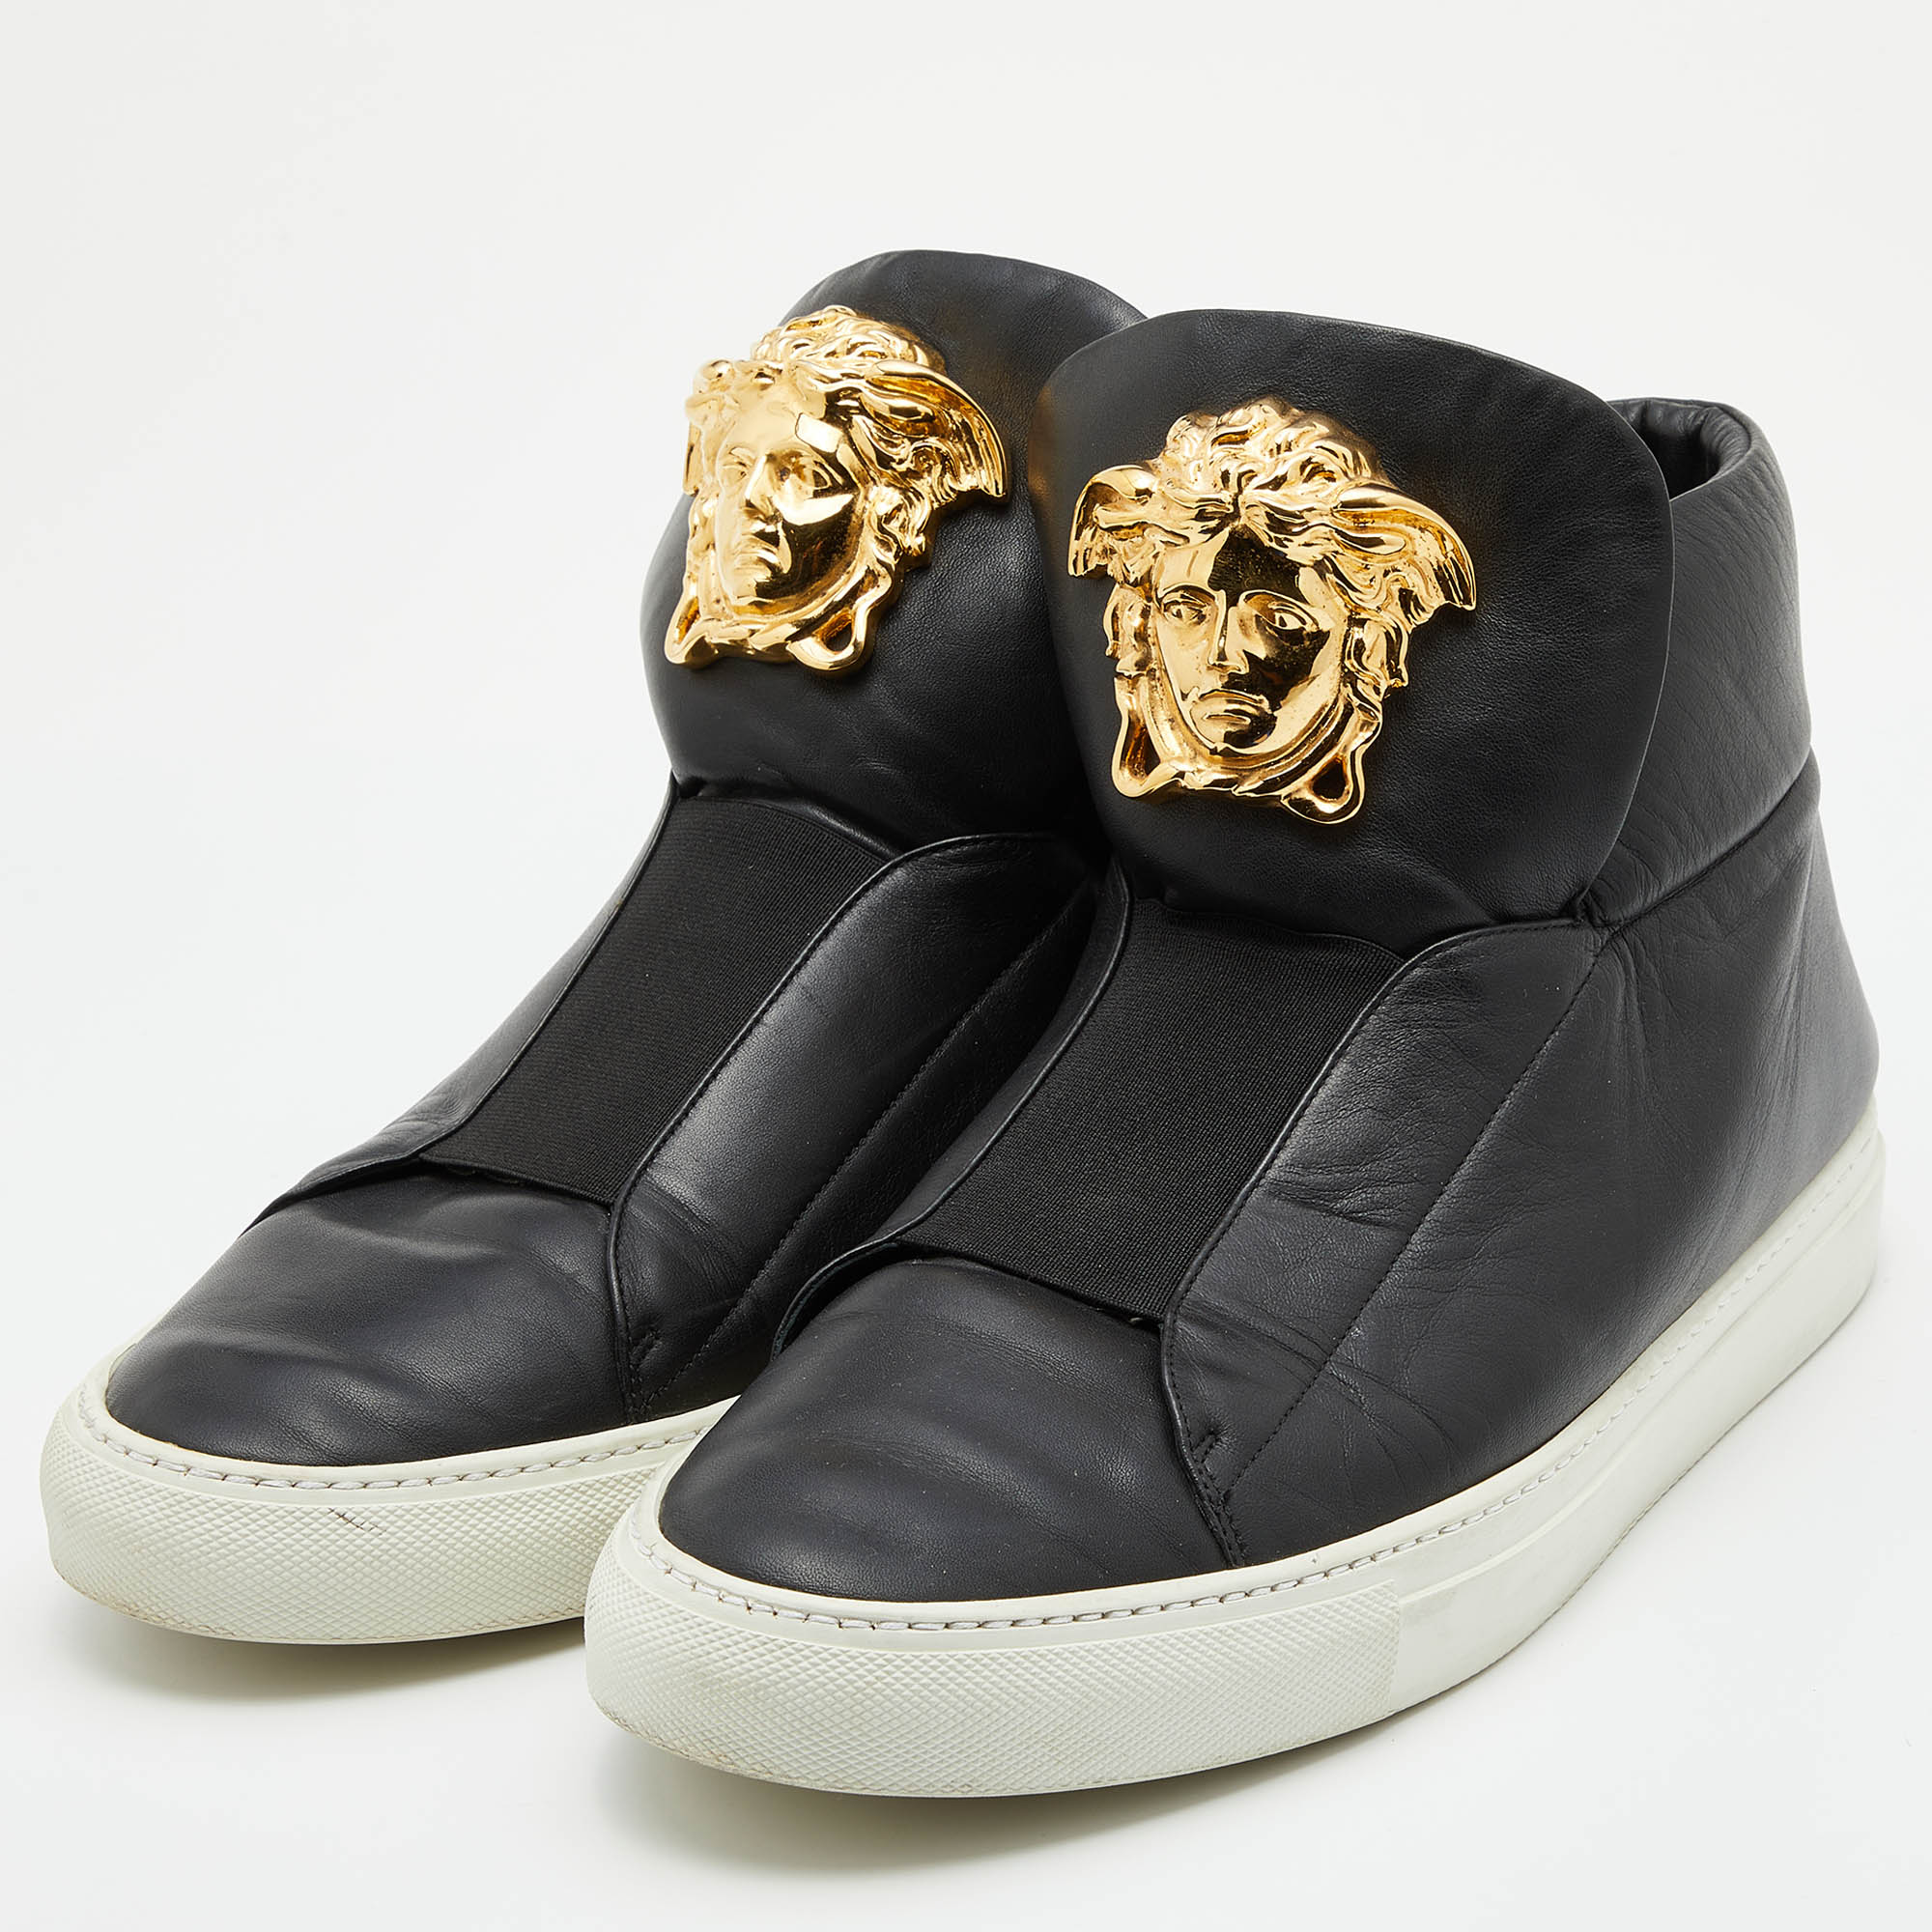 

Versace Black Leather Palazzo Medusa High Top Slip On Sneakers Size